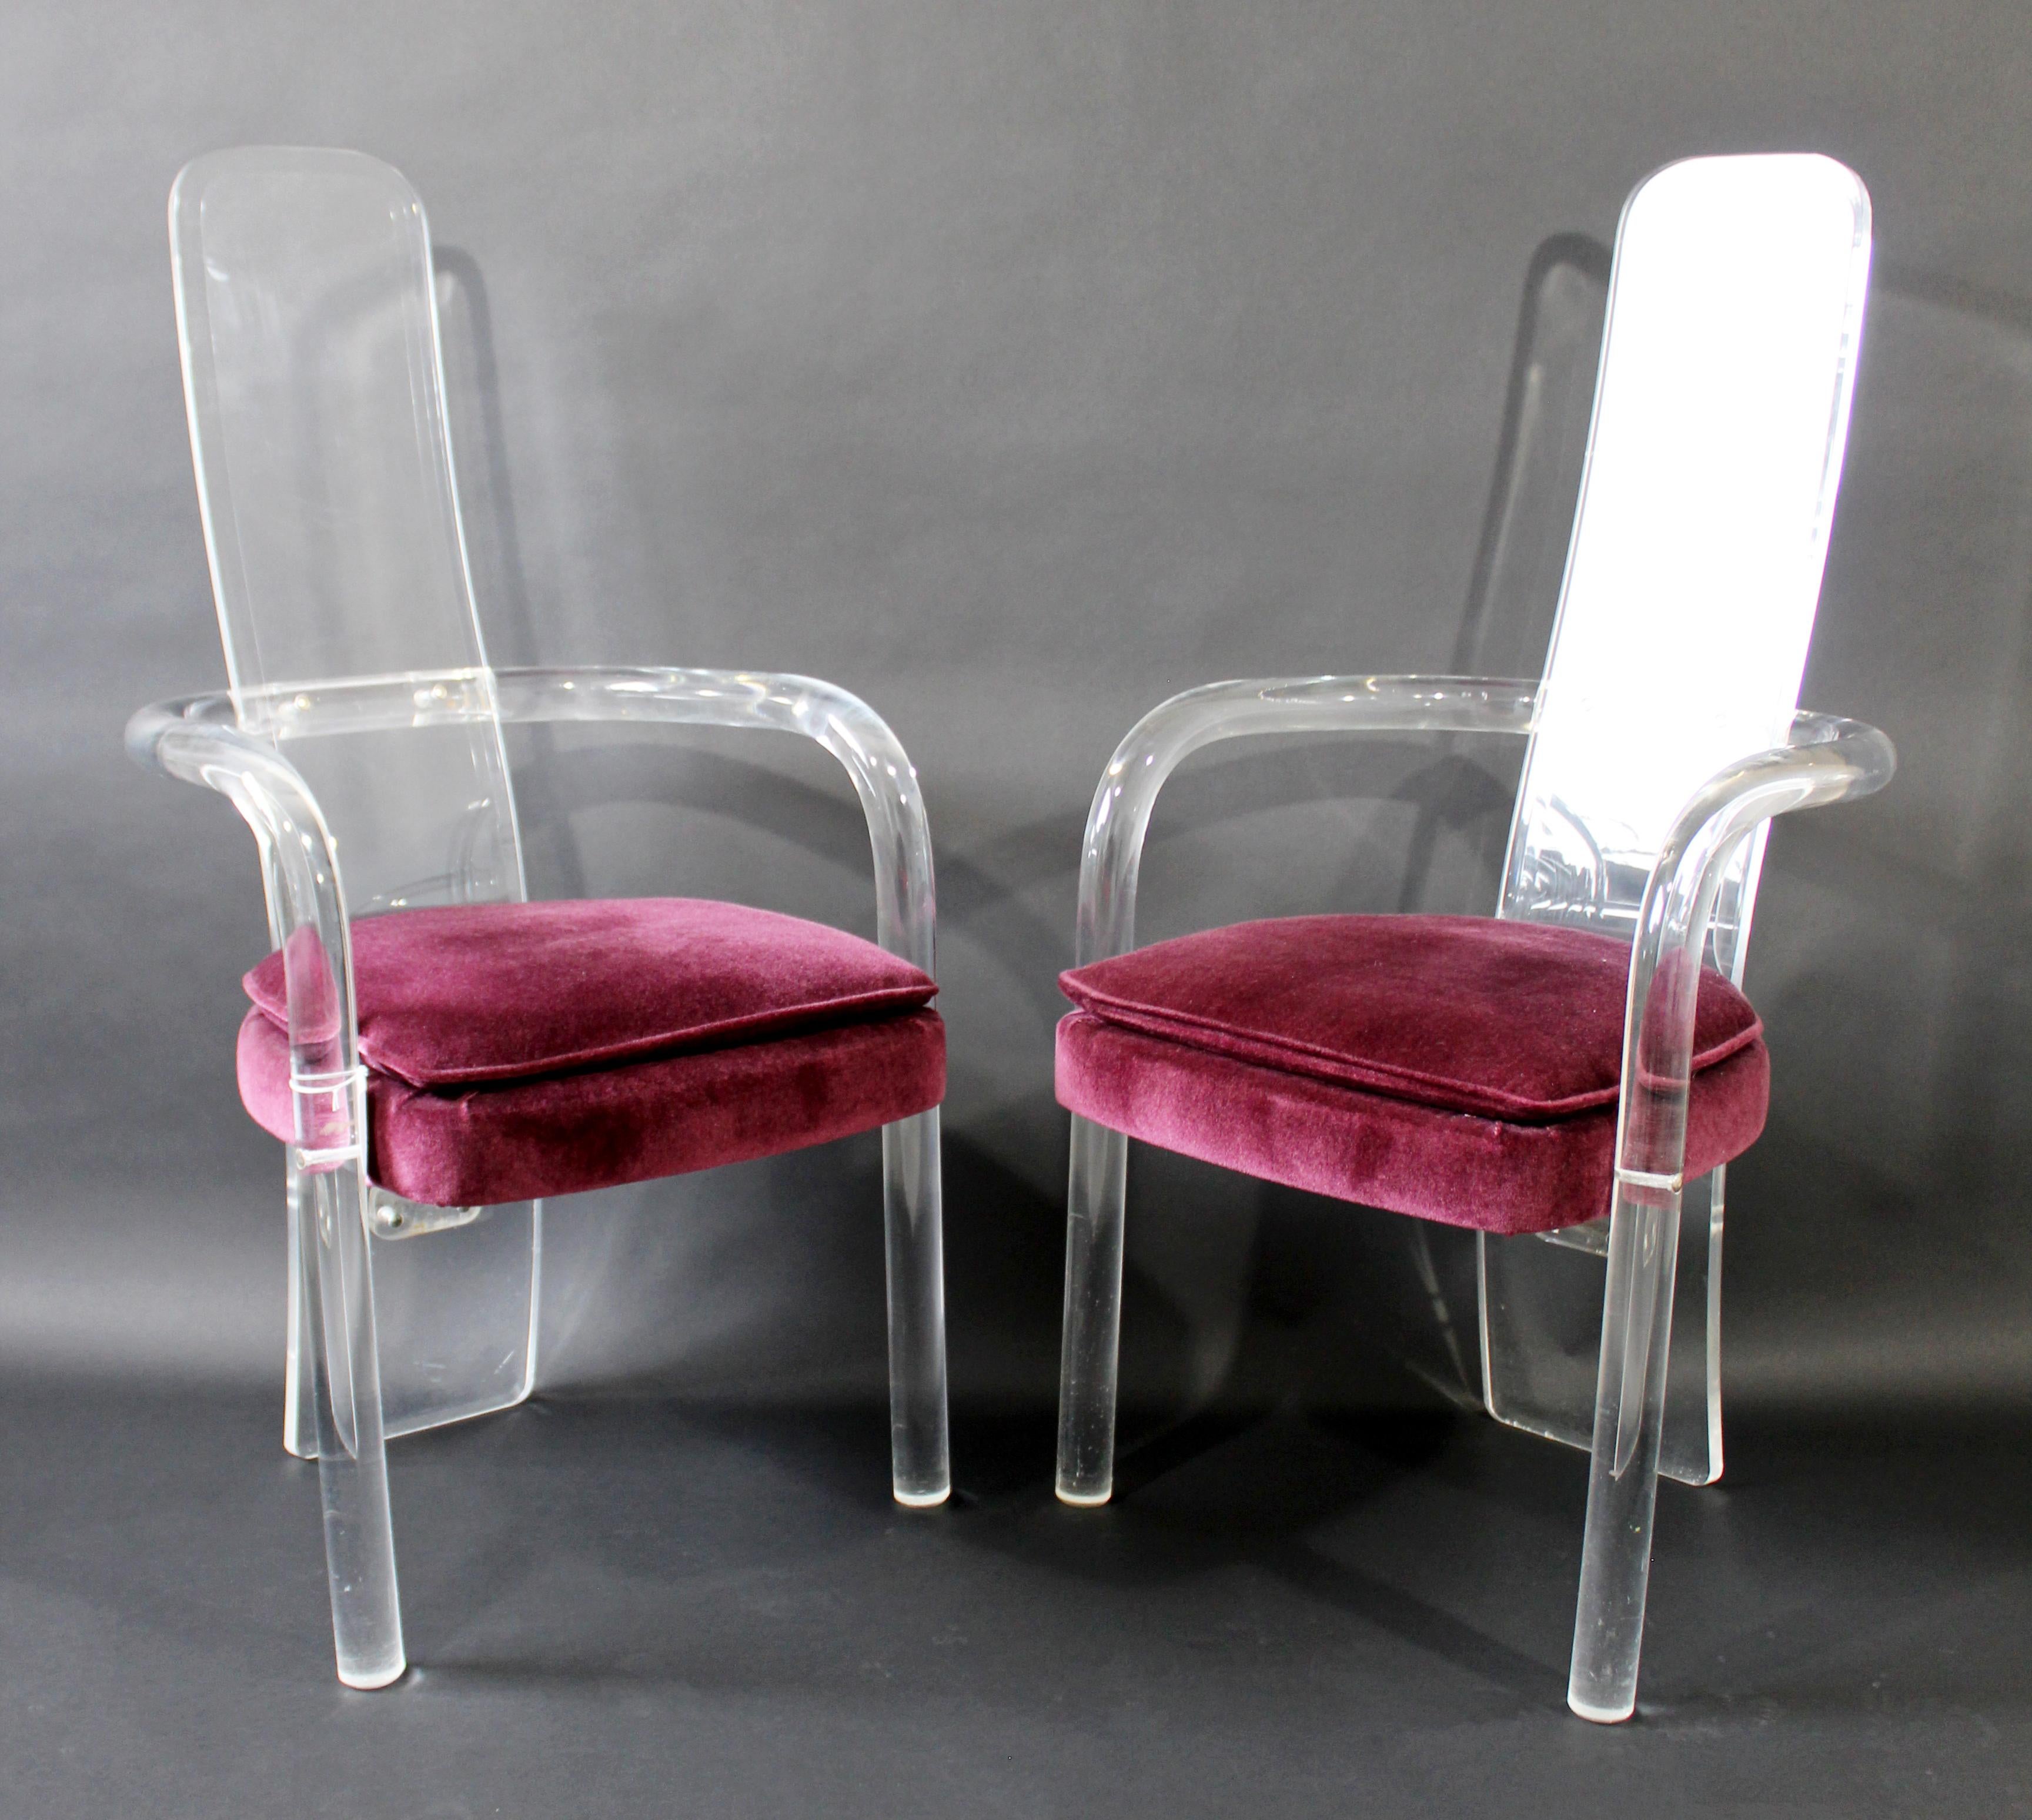 For your consideration is a stunning pair of Lucite accent armchairs, by Charles Hollis Jones for Hill Manufacturing, circa 1970s. In very good vintage condition. The dimensions are 21